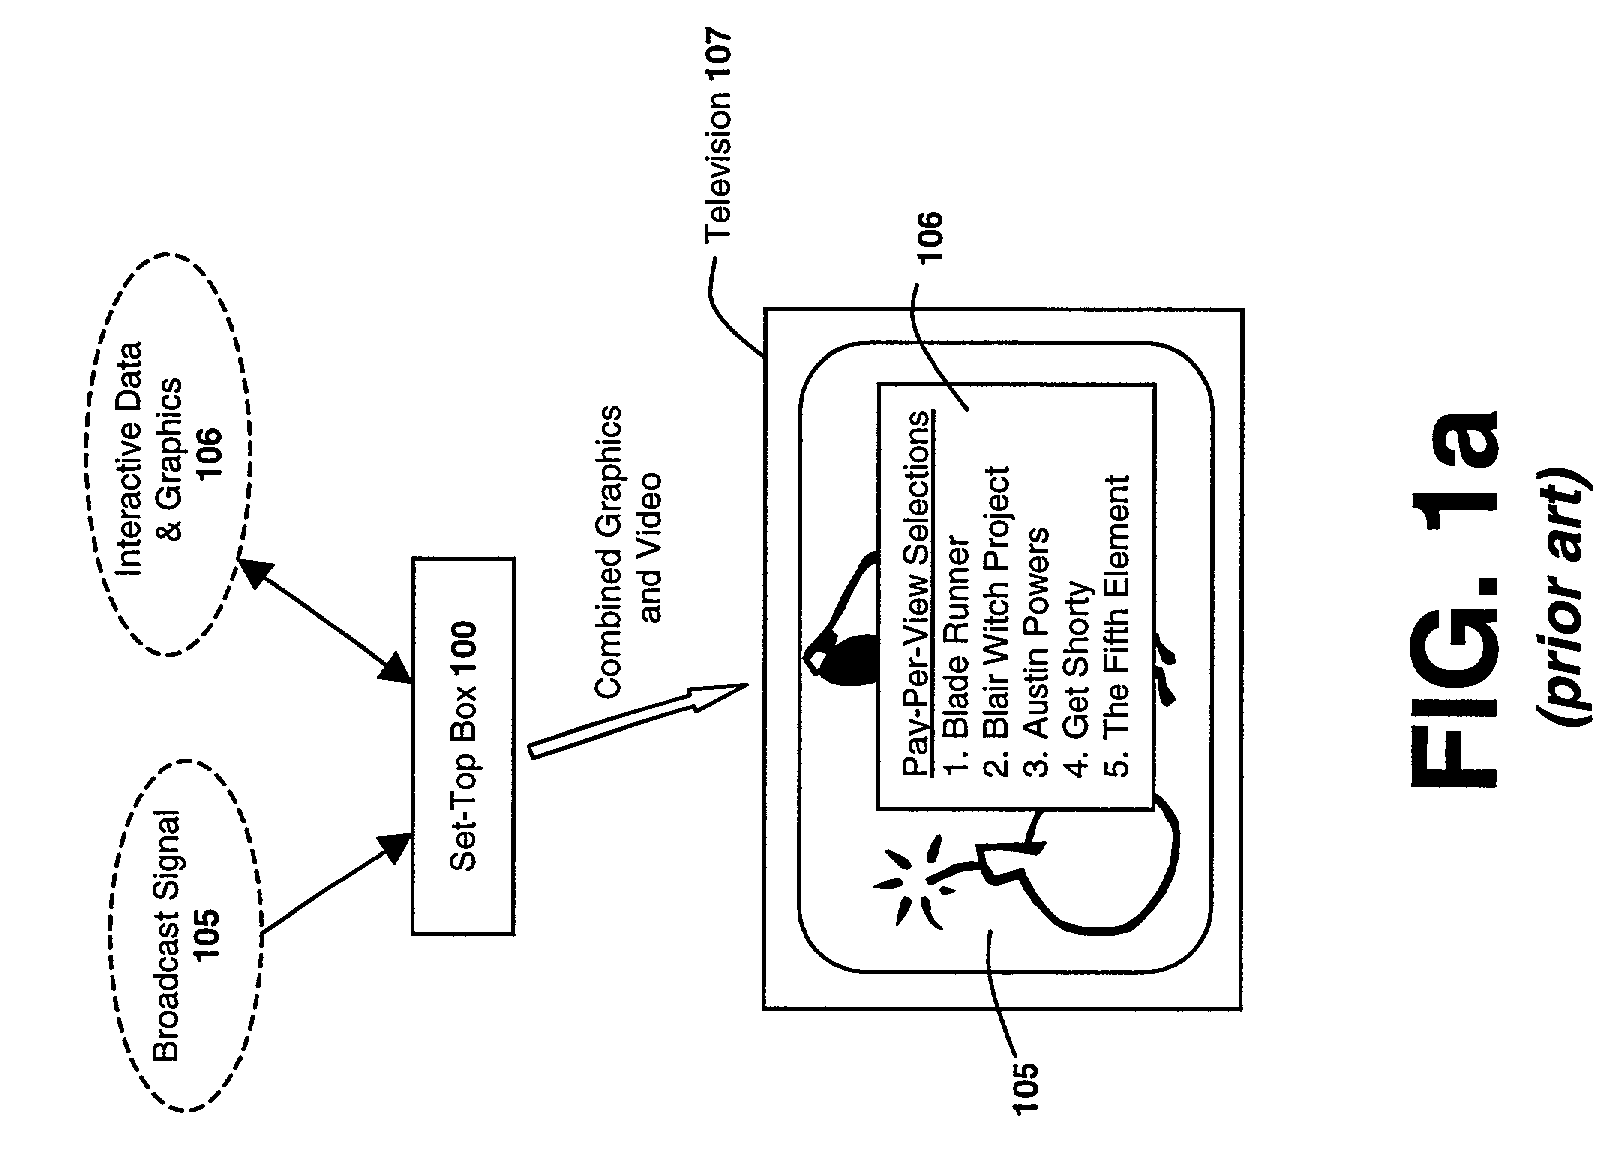 System and method for rendering graphics and video on a display